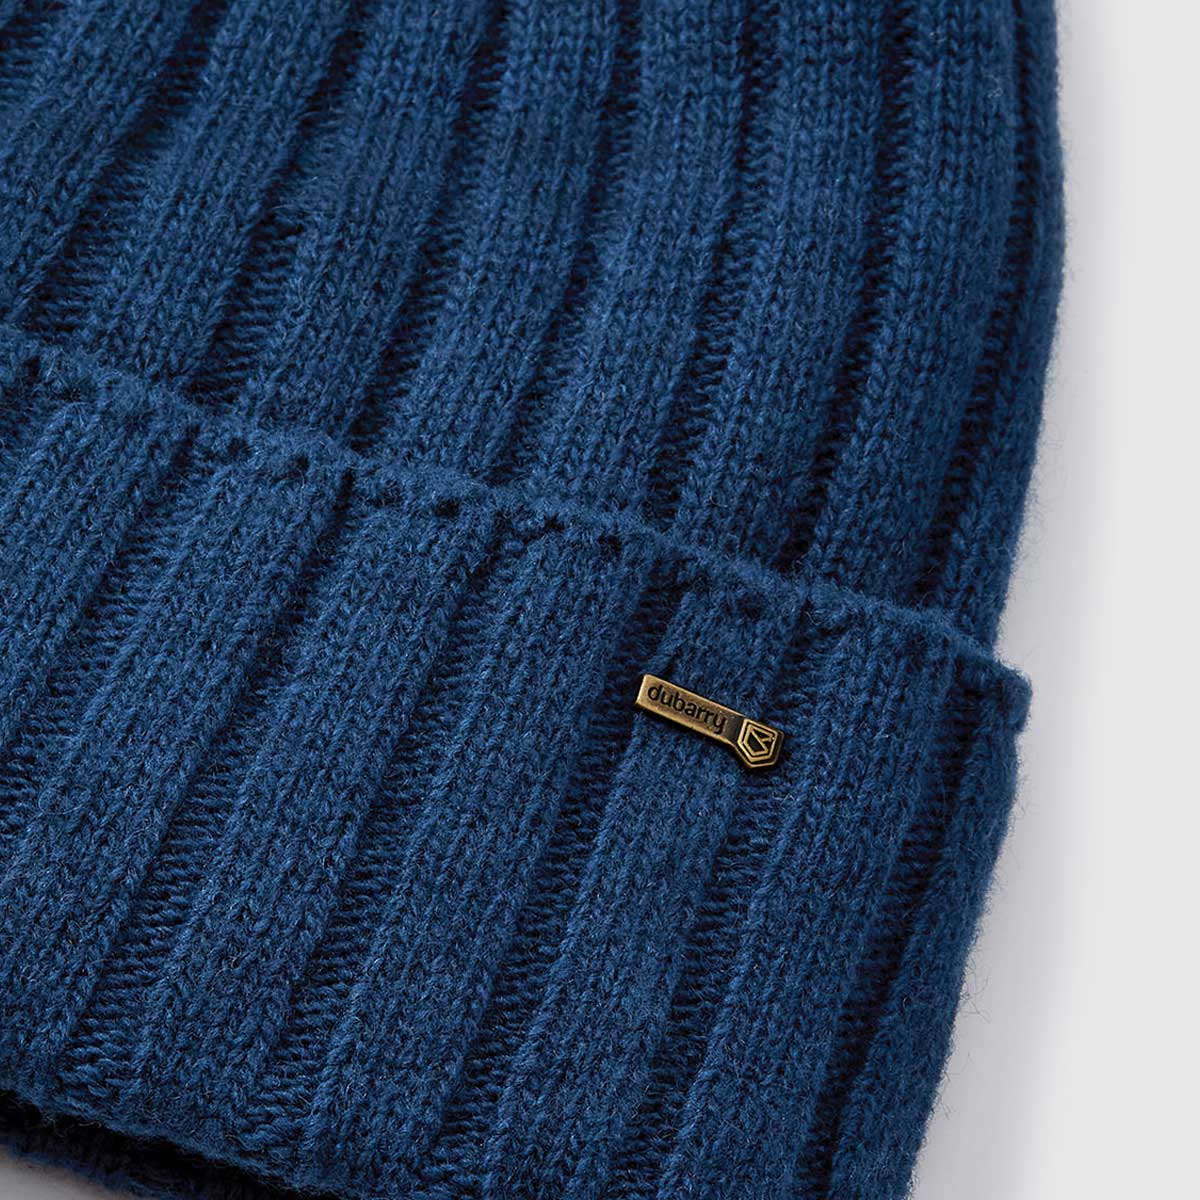 DUBARRY Curlew Knitted Bobble Hat - Peacock Blue